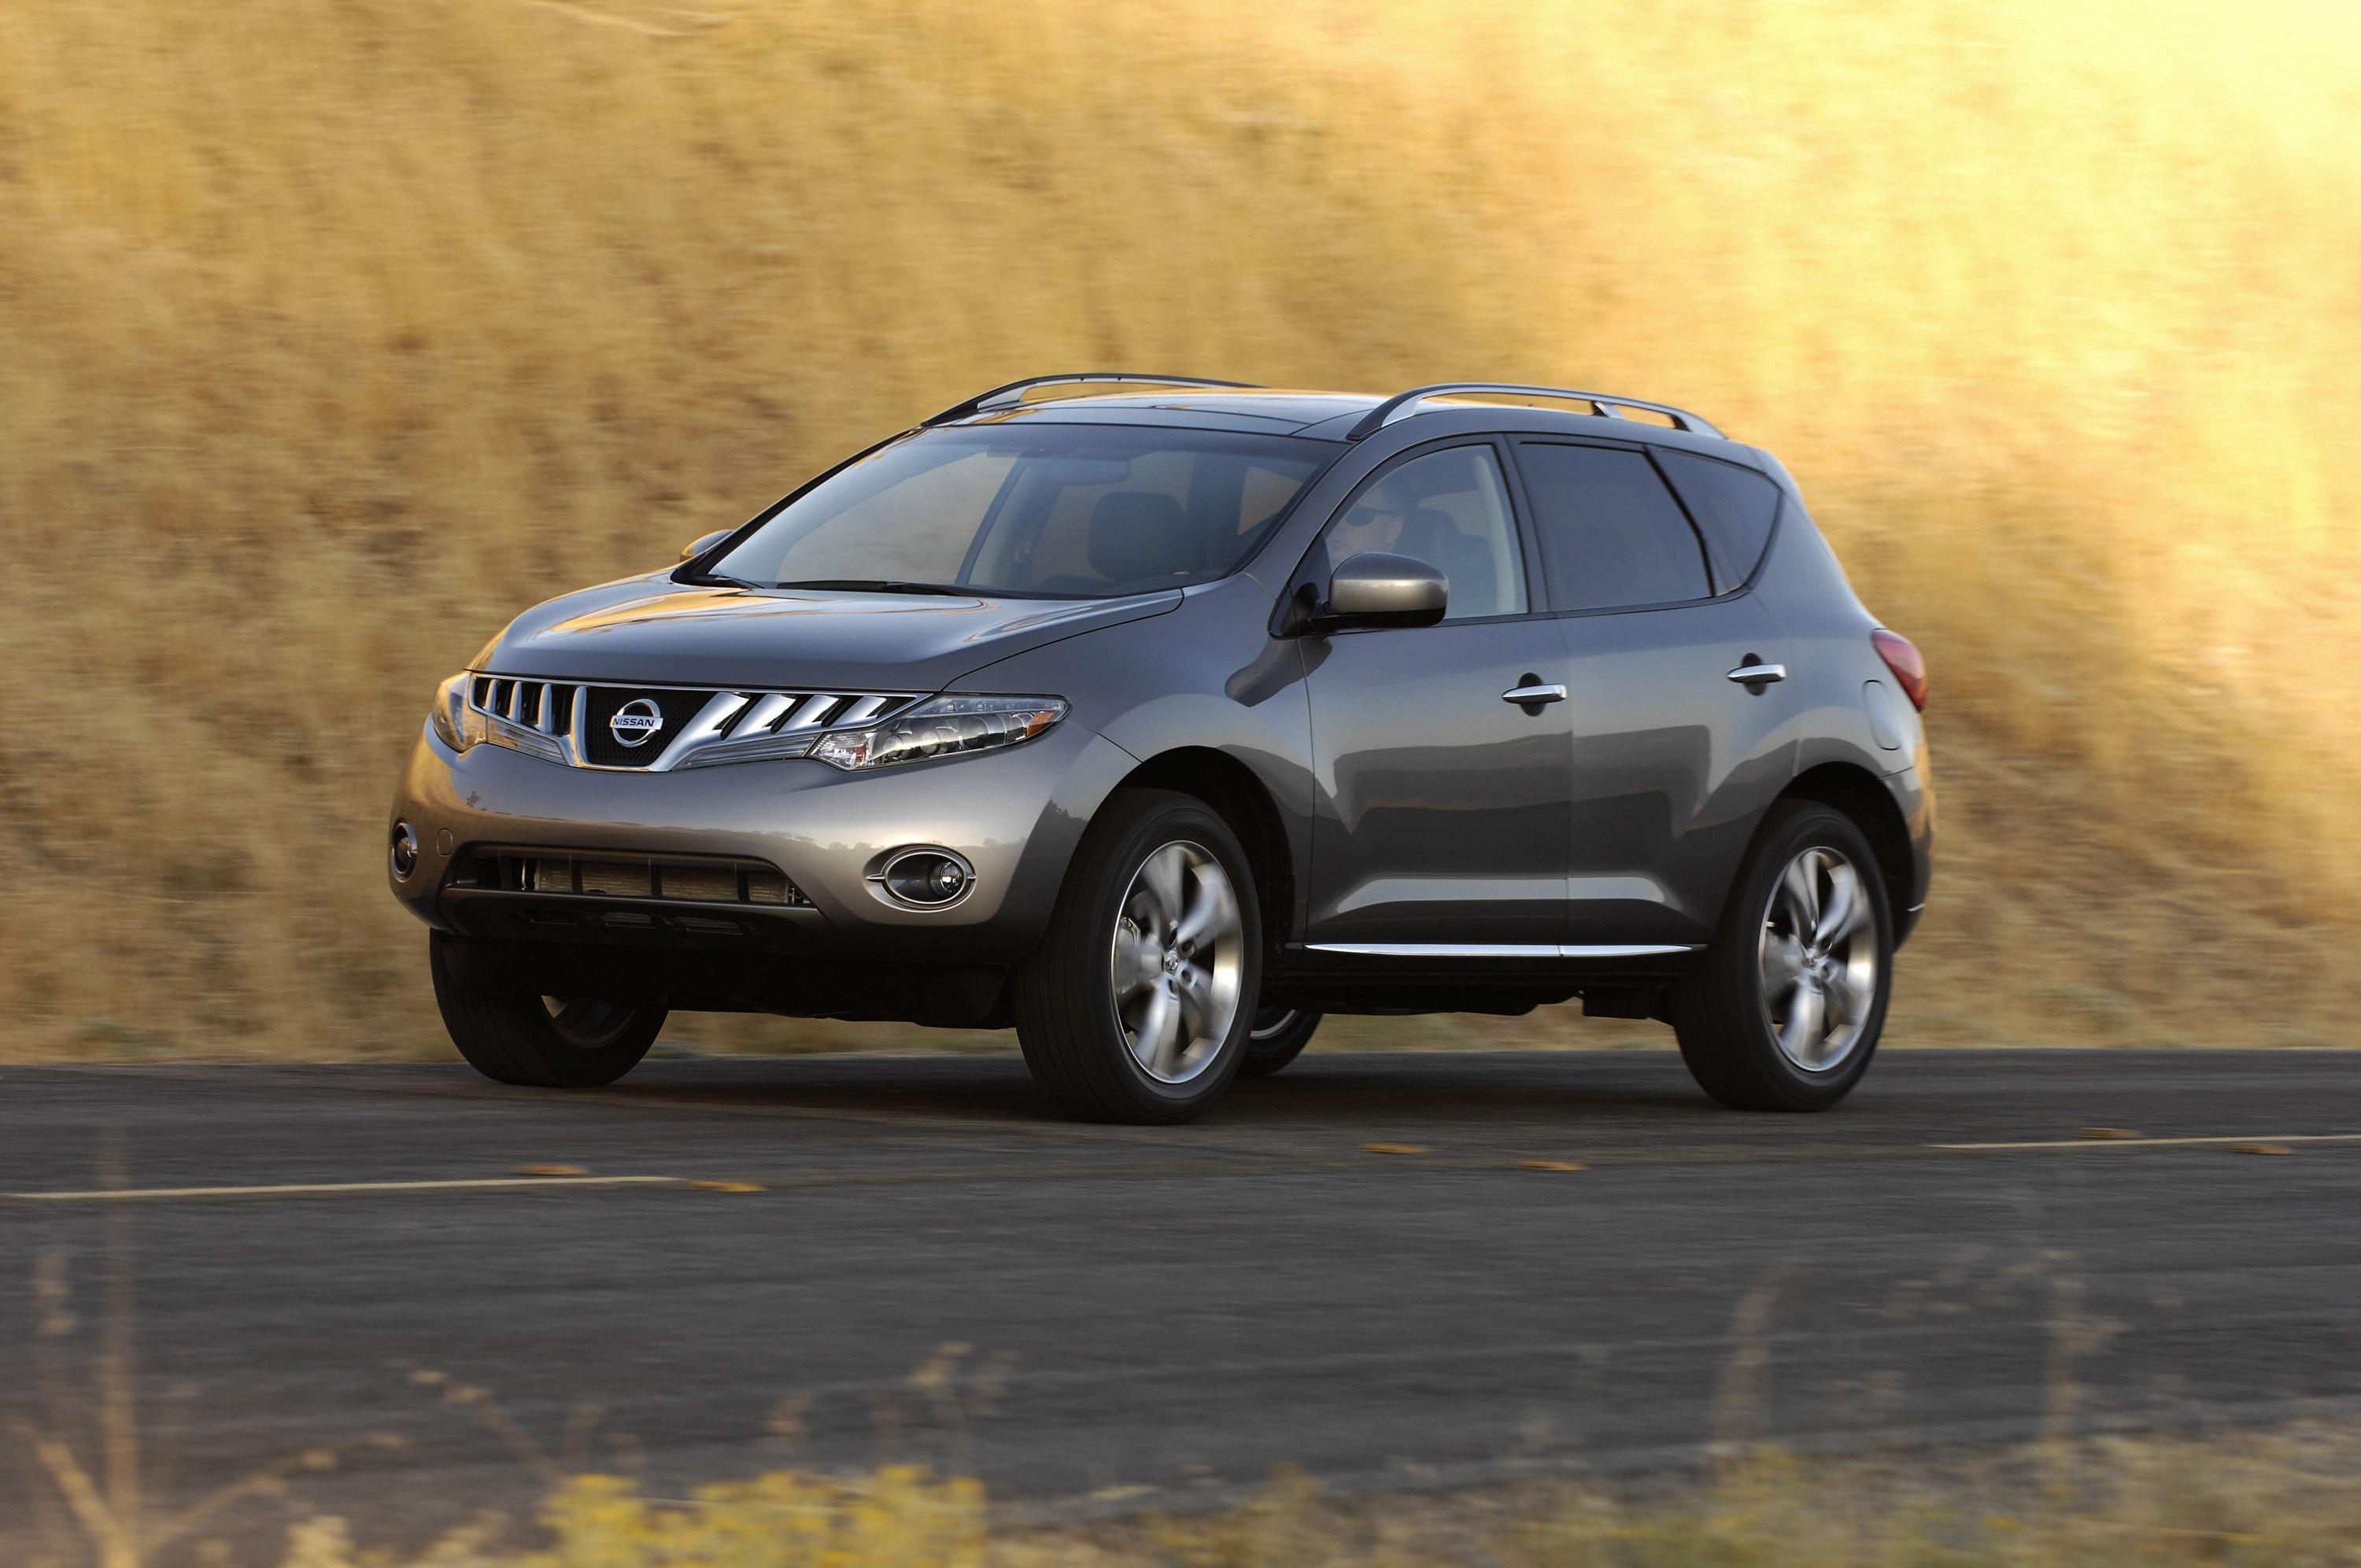 Nissan Murano, High definition, Car pictures, Crossover model, 3000x2000 HD Desktop